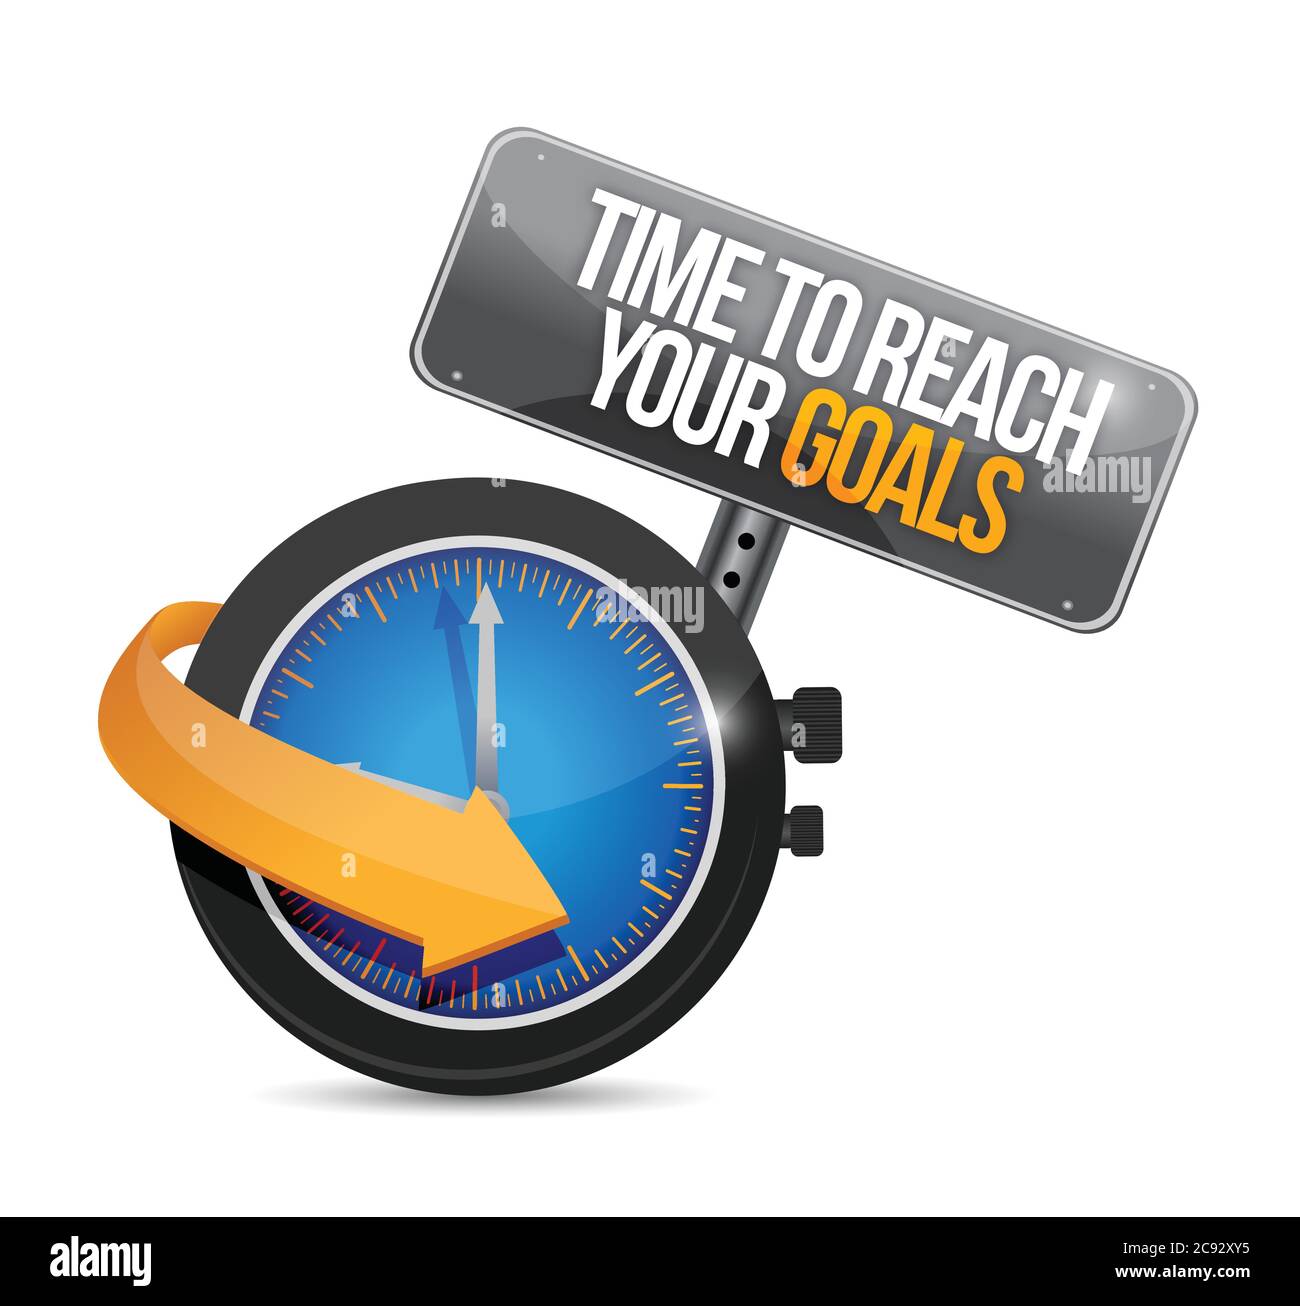 Time to reach your goals concept illustration design over a white background Stock Vector